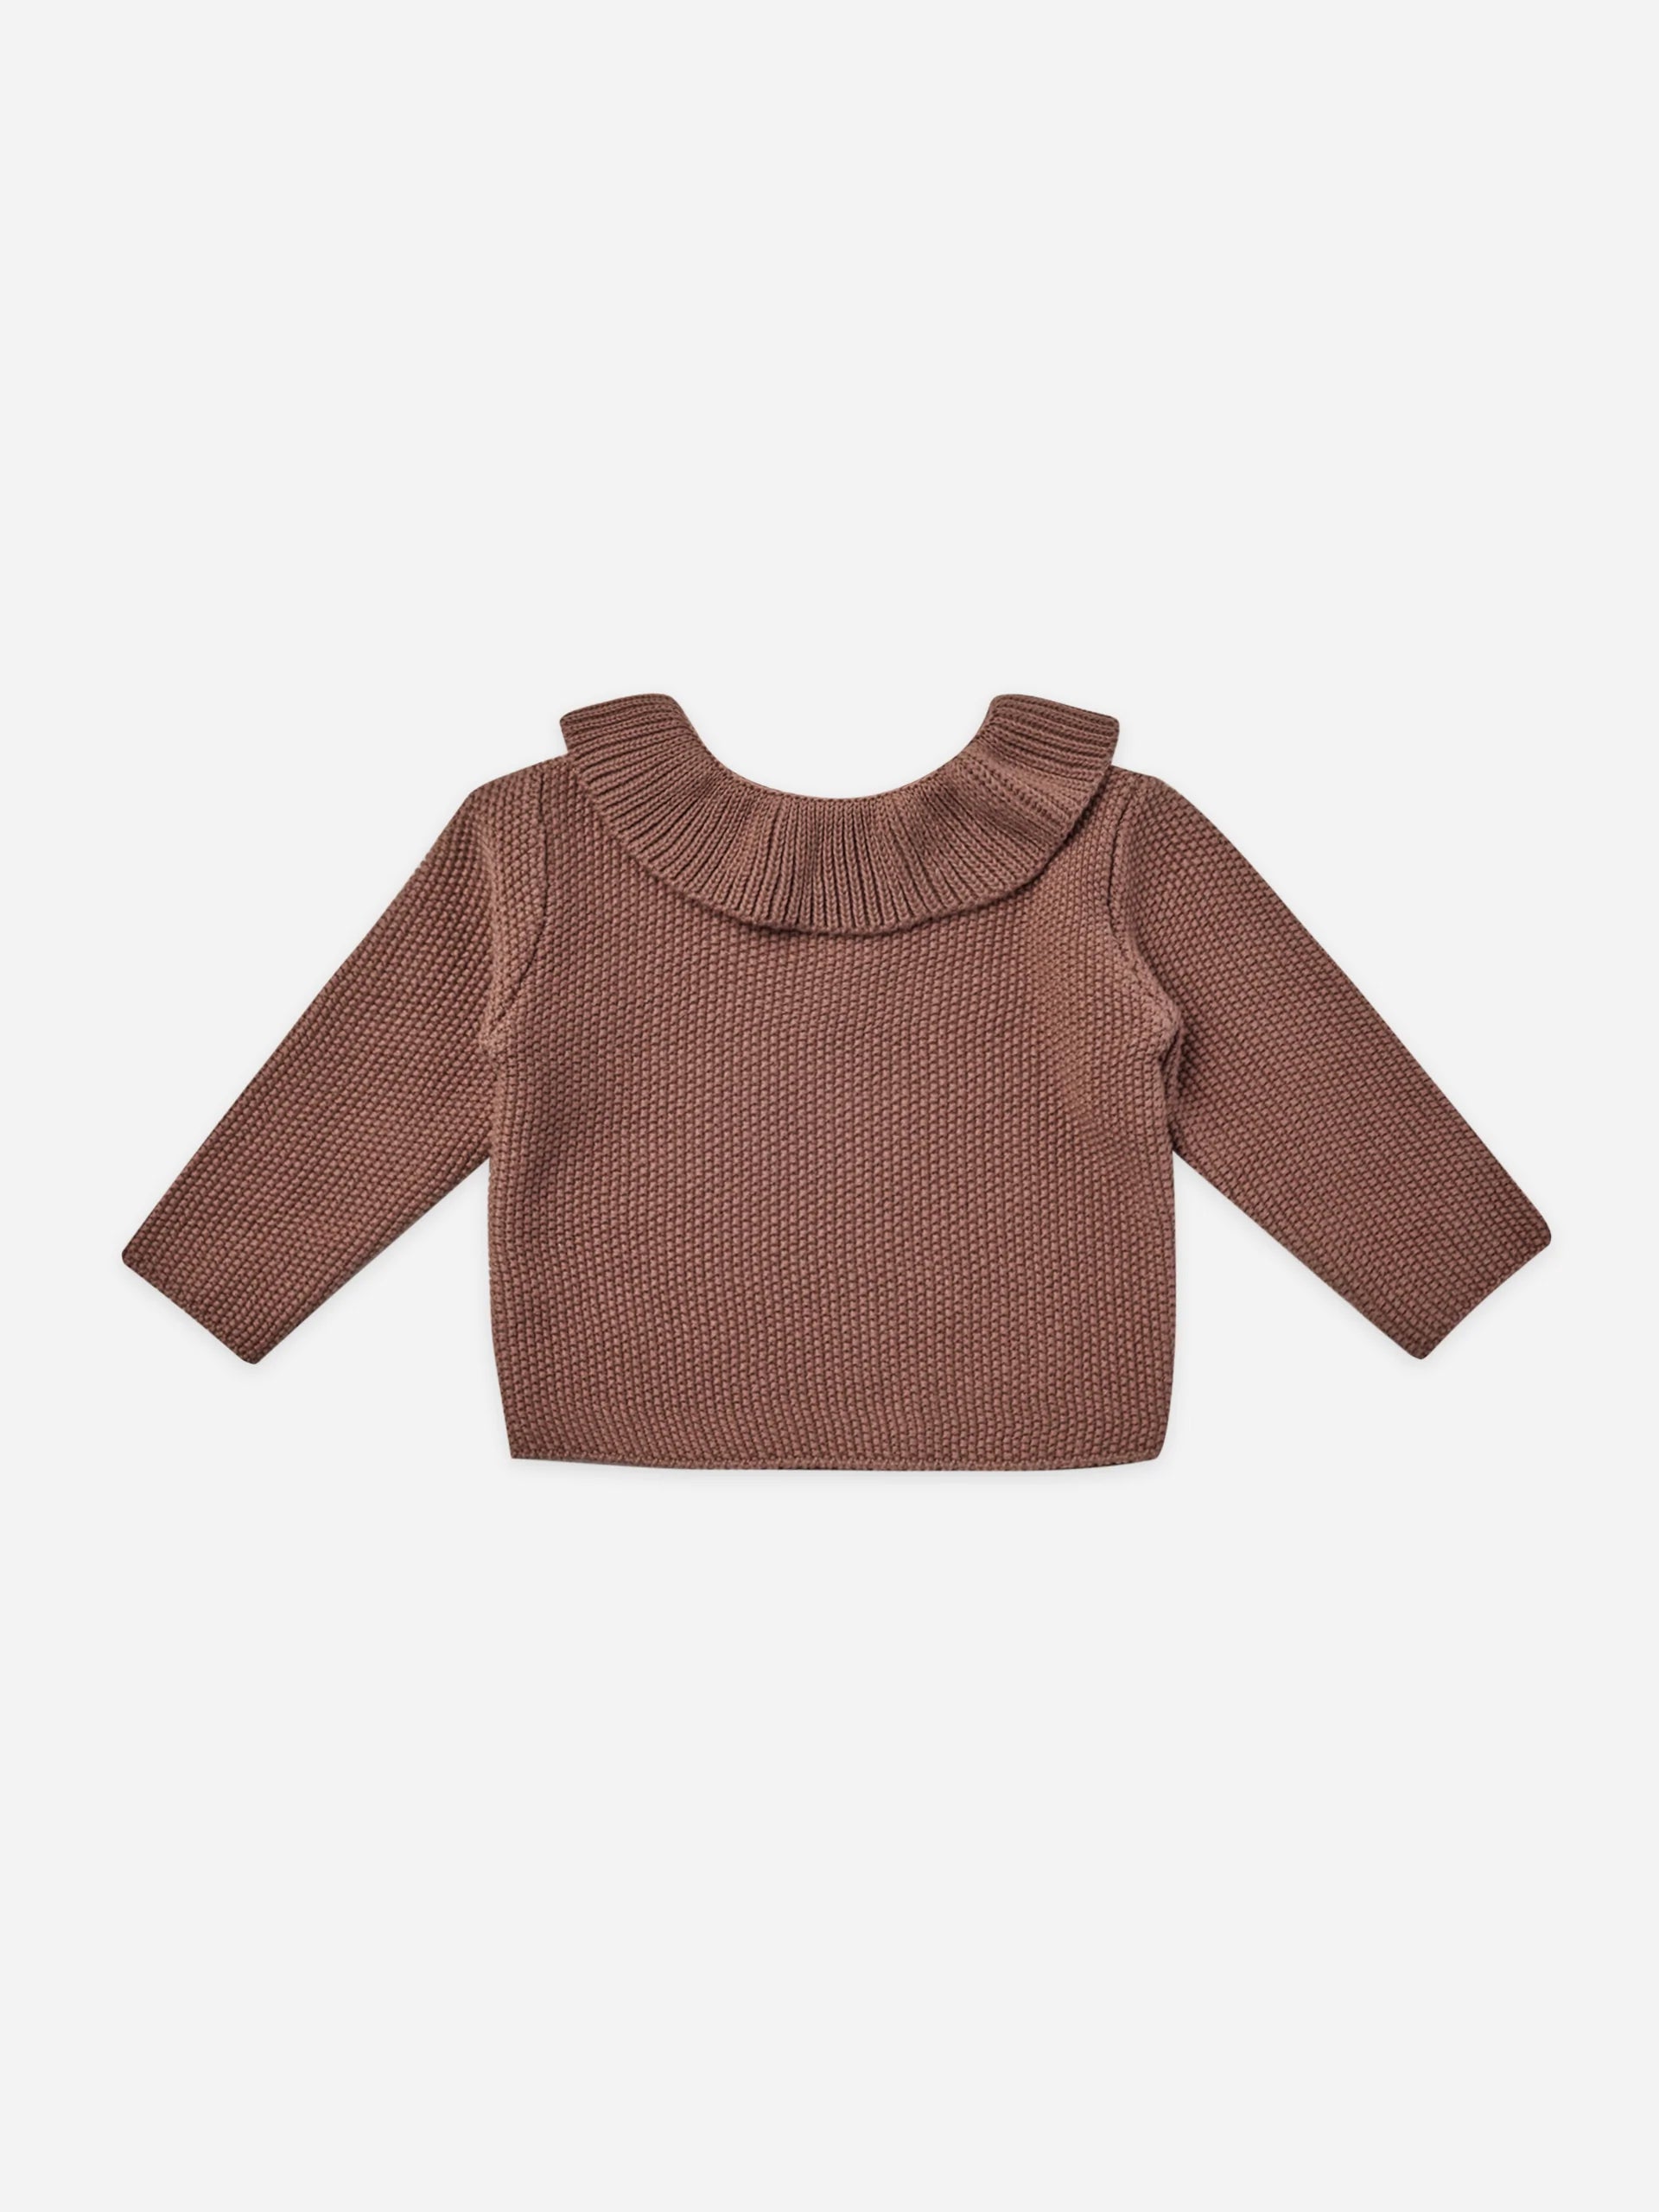 Ruffle Collar Knit Sweater in Pecan  - Doodlebug's Children's Boutique